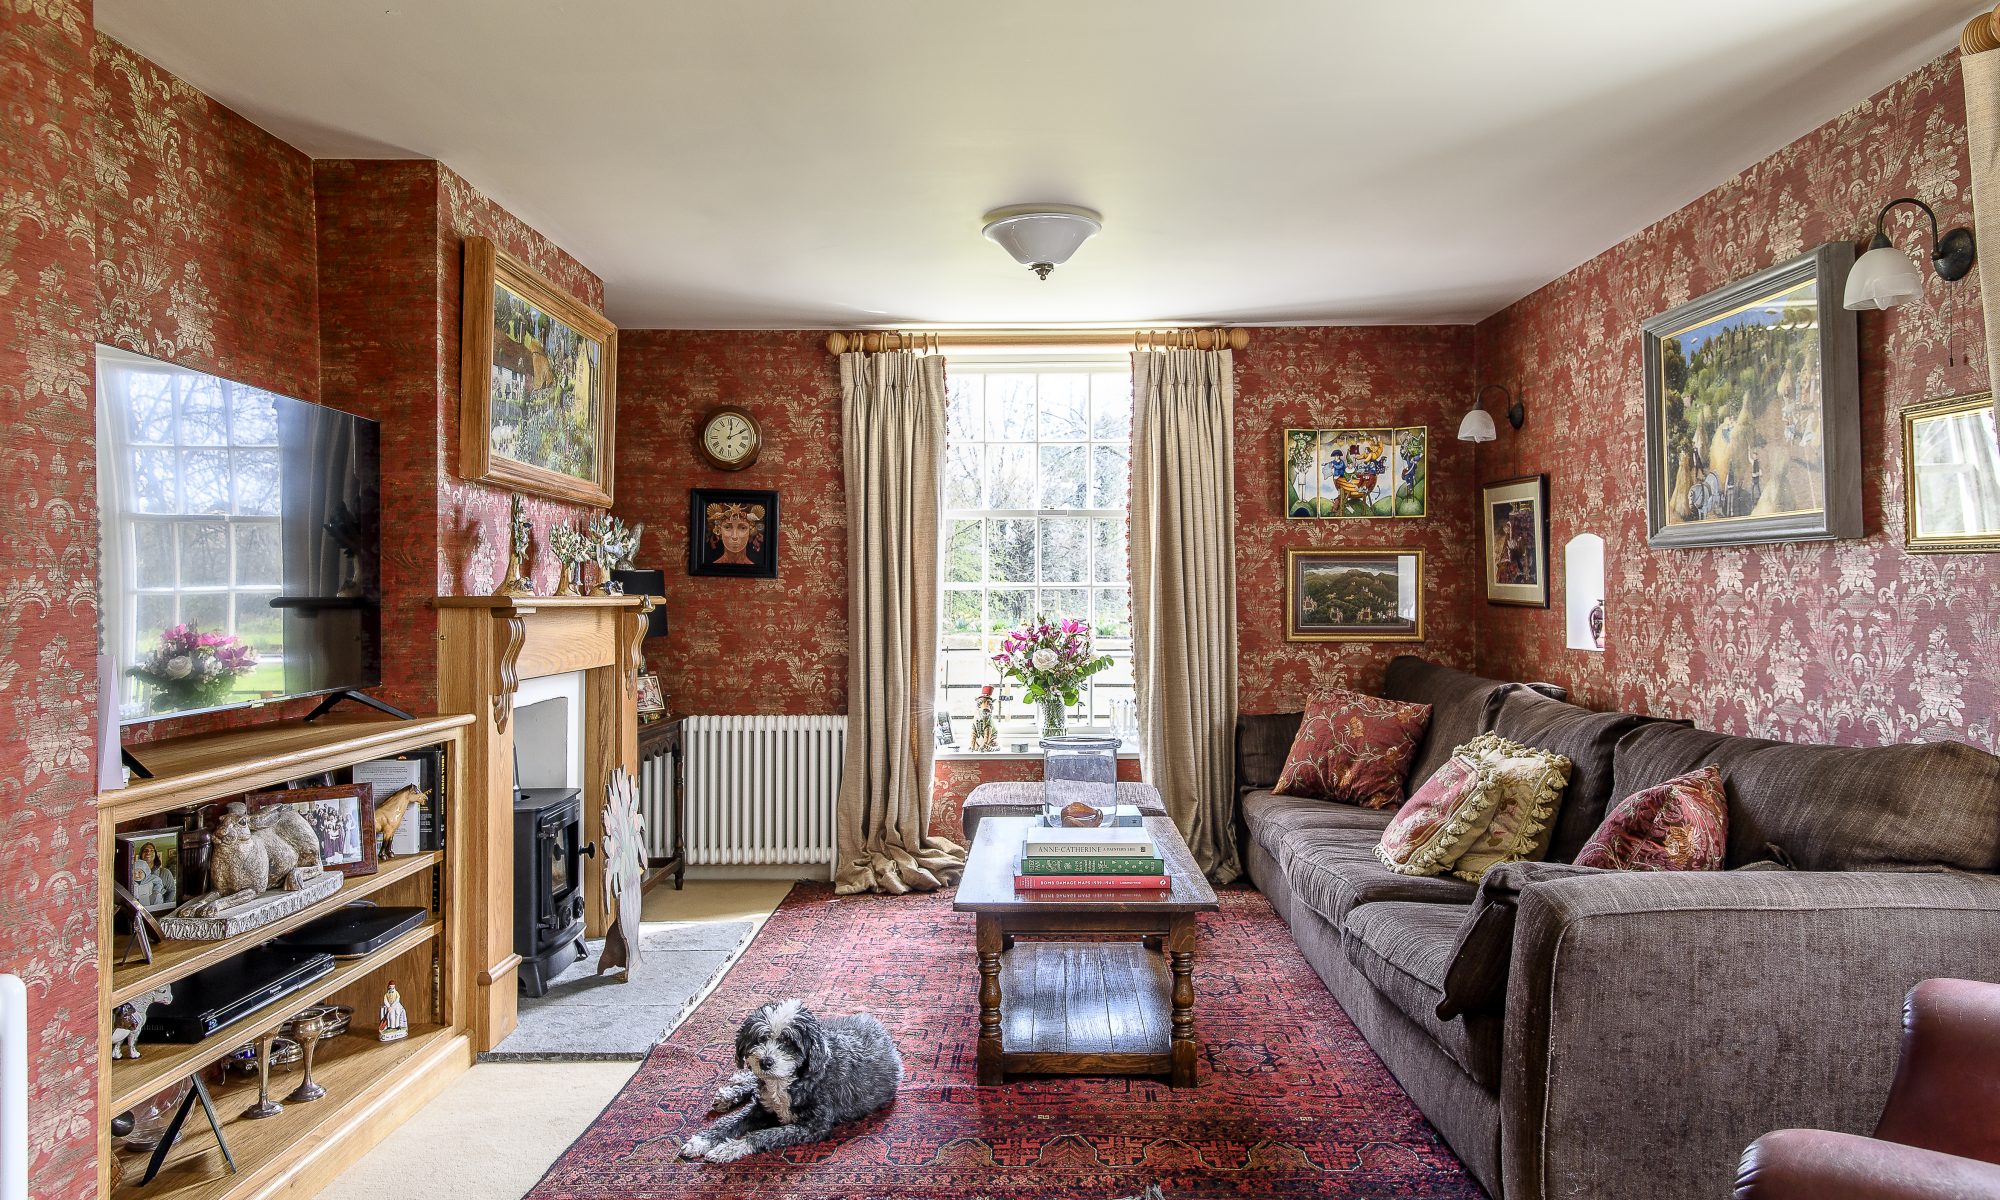 The sitting room exudes warmth and comfort with a palette of rich reds and squashy sofas